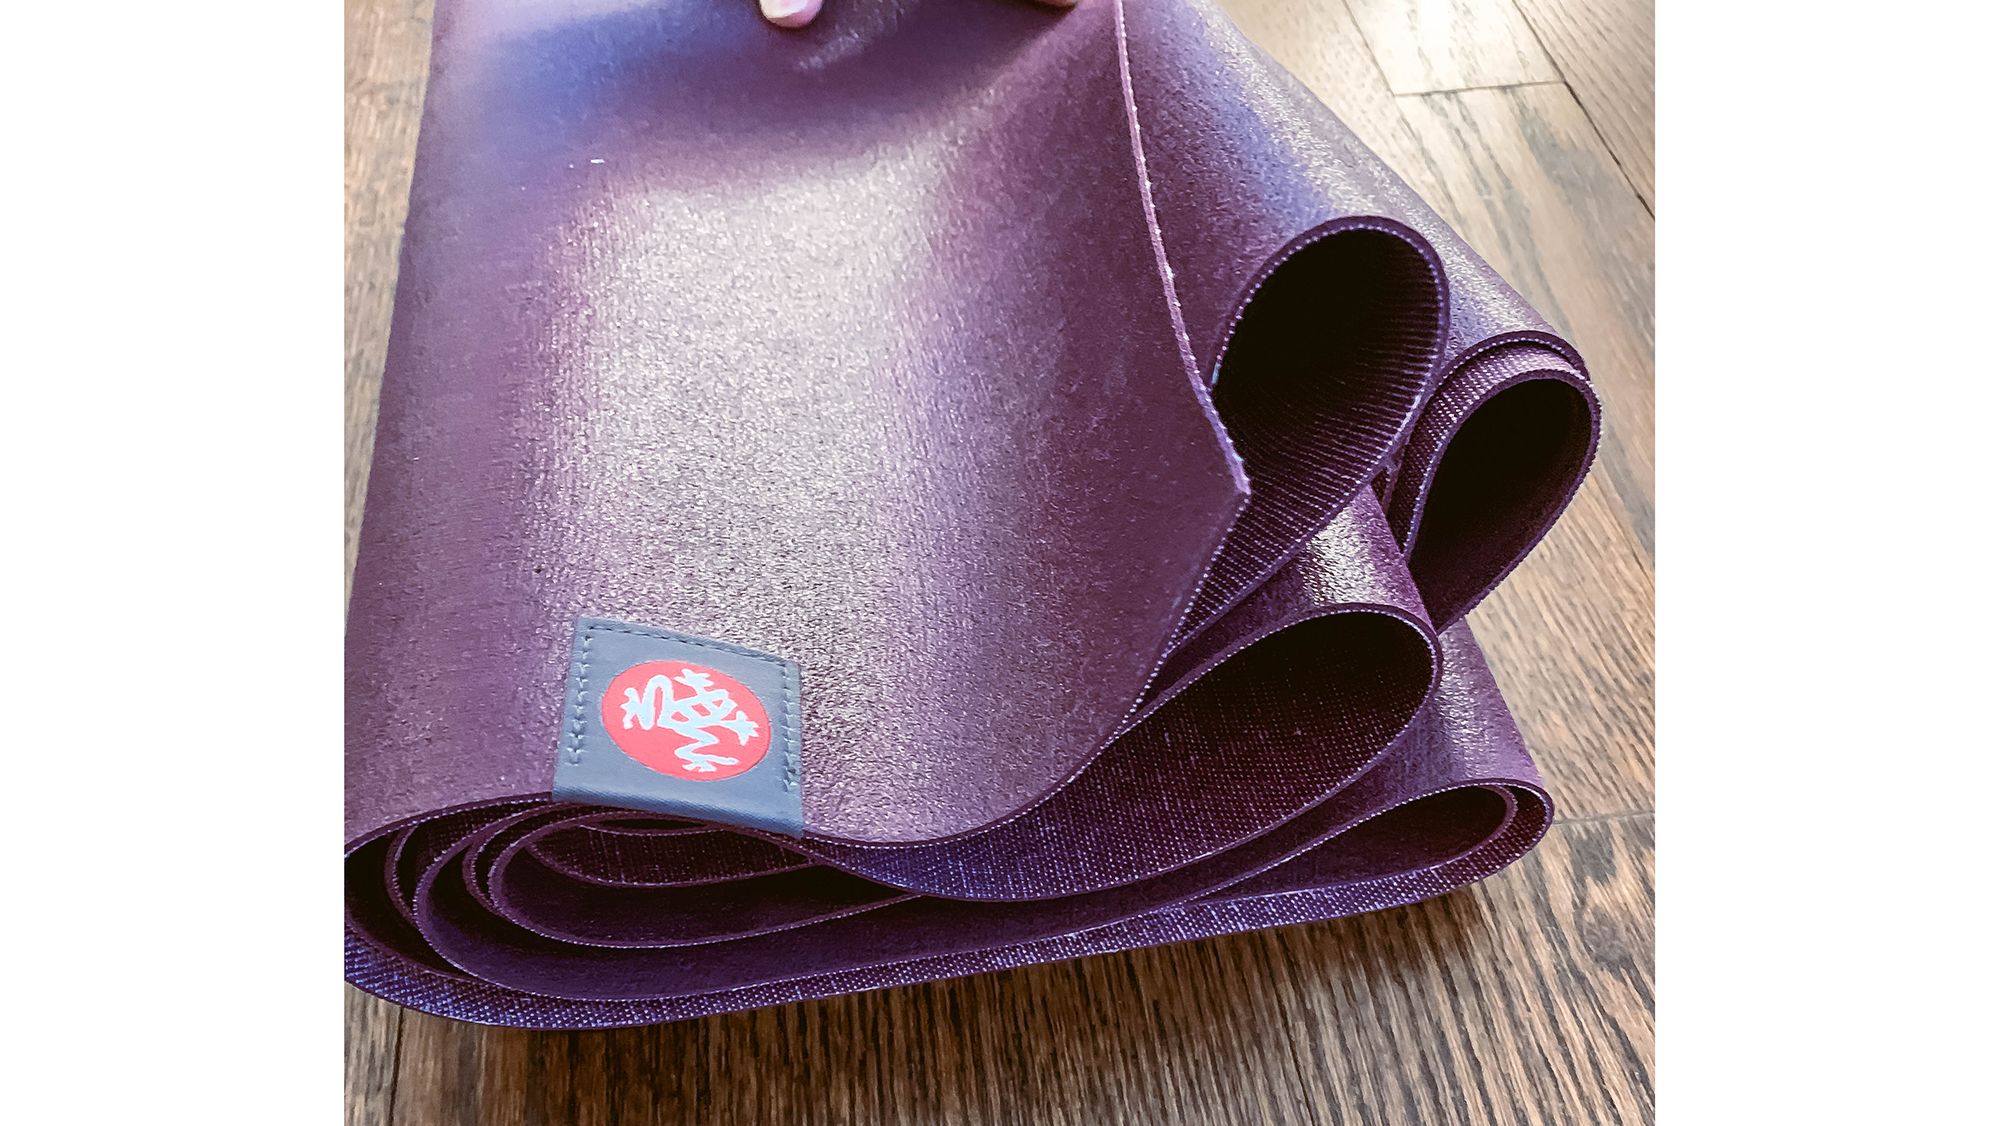 I've Spent More Than a Decade Testing Yoga Mats. This One Is the Best